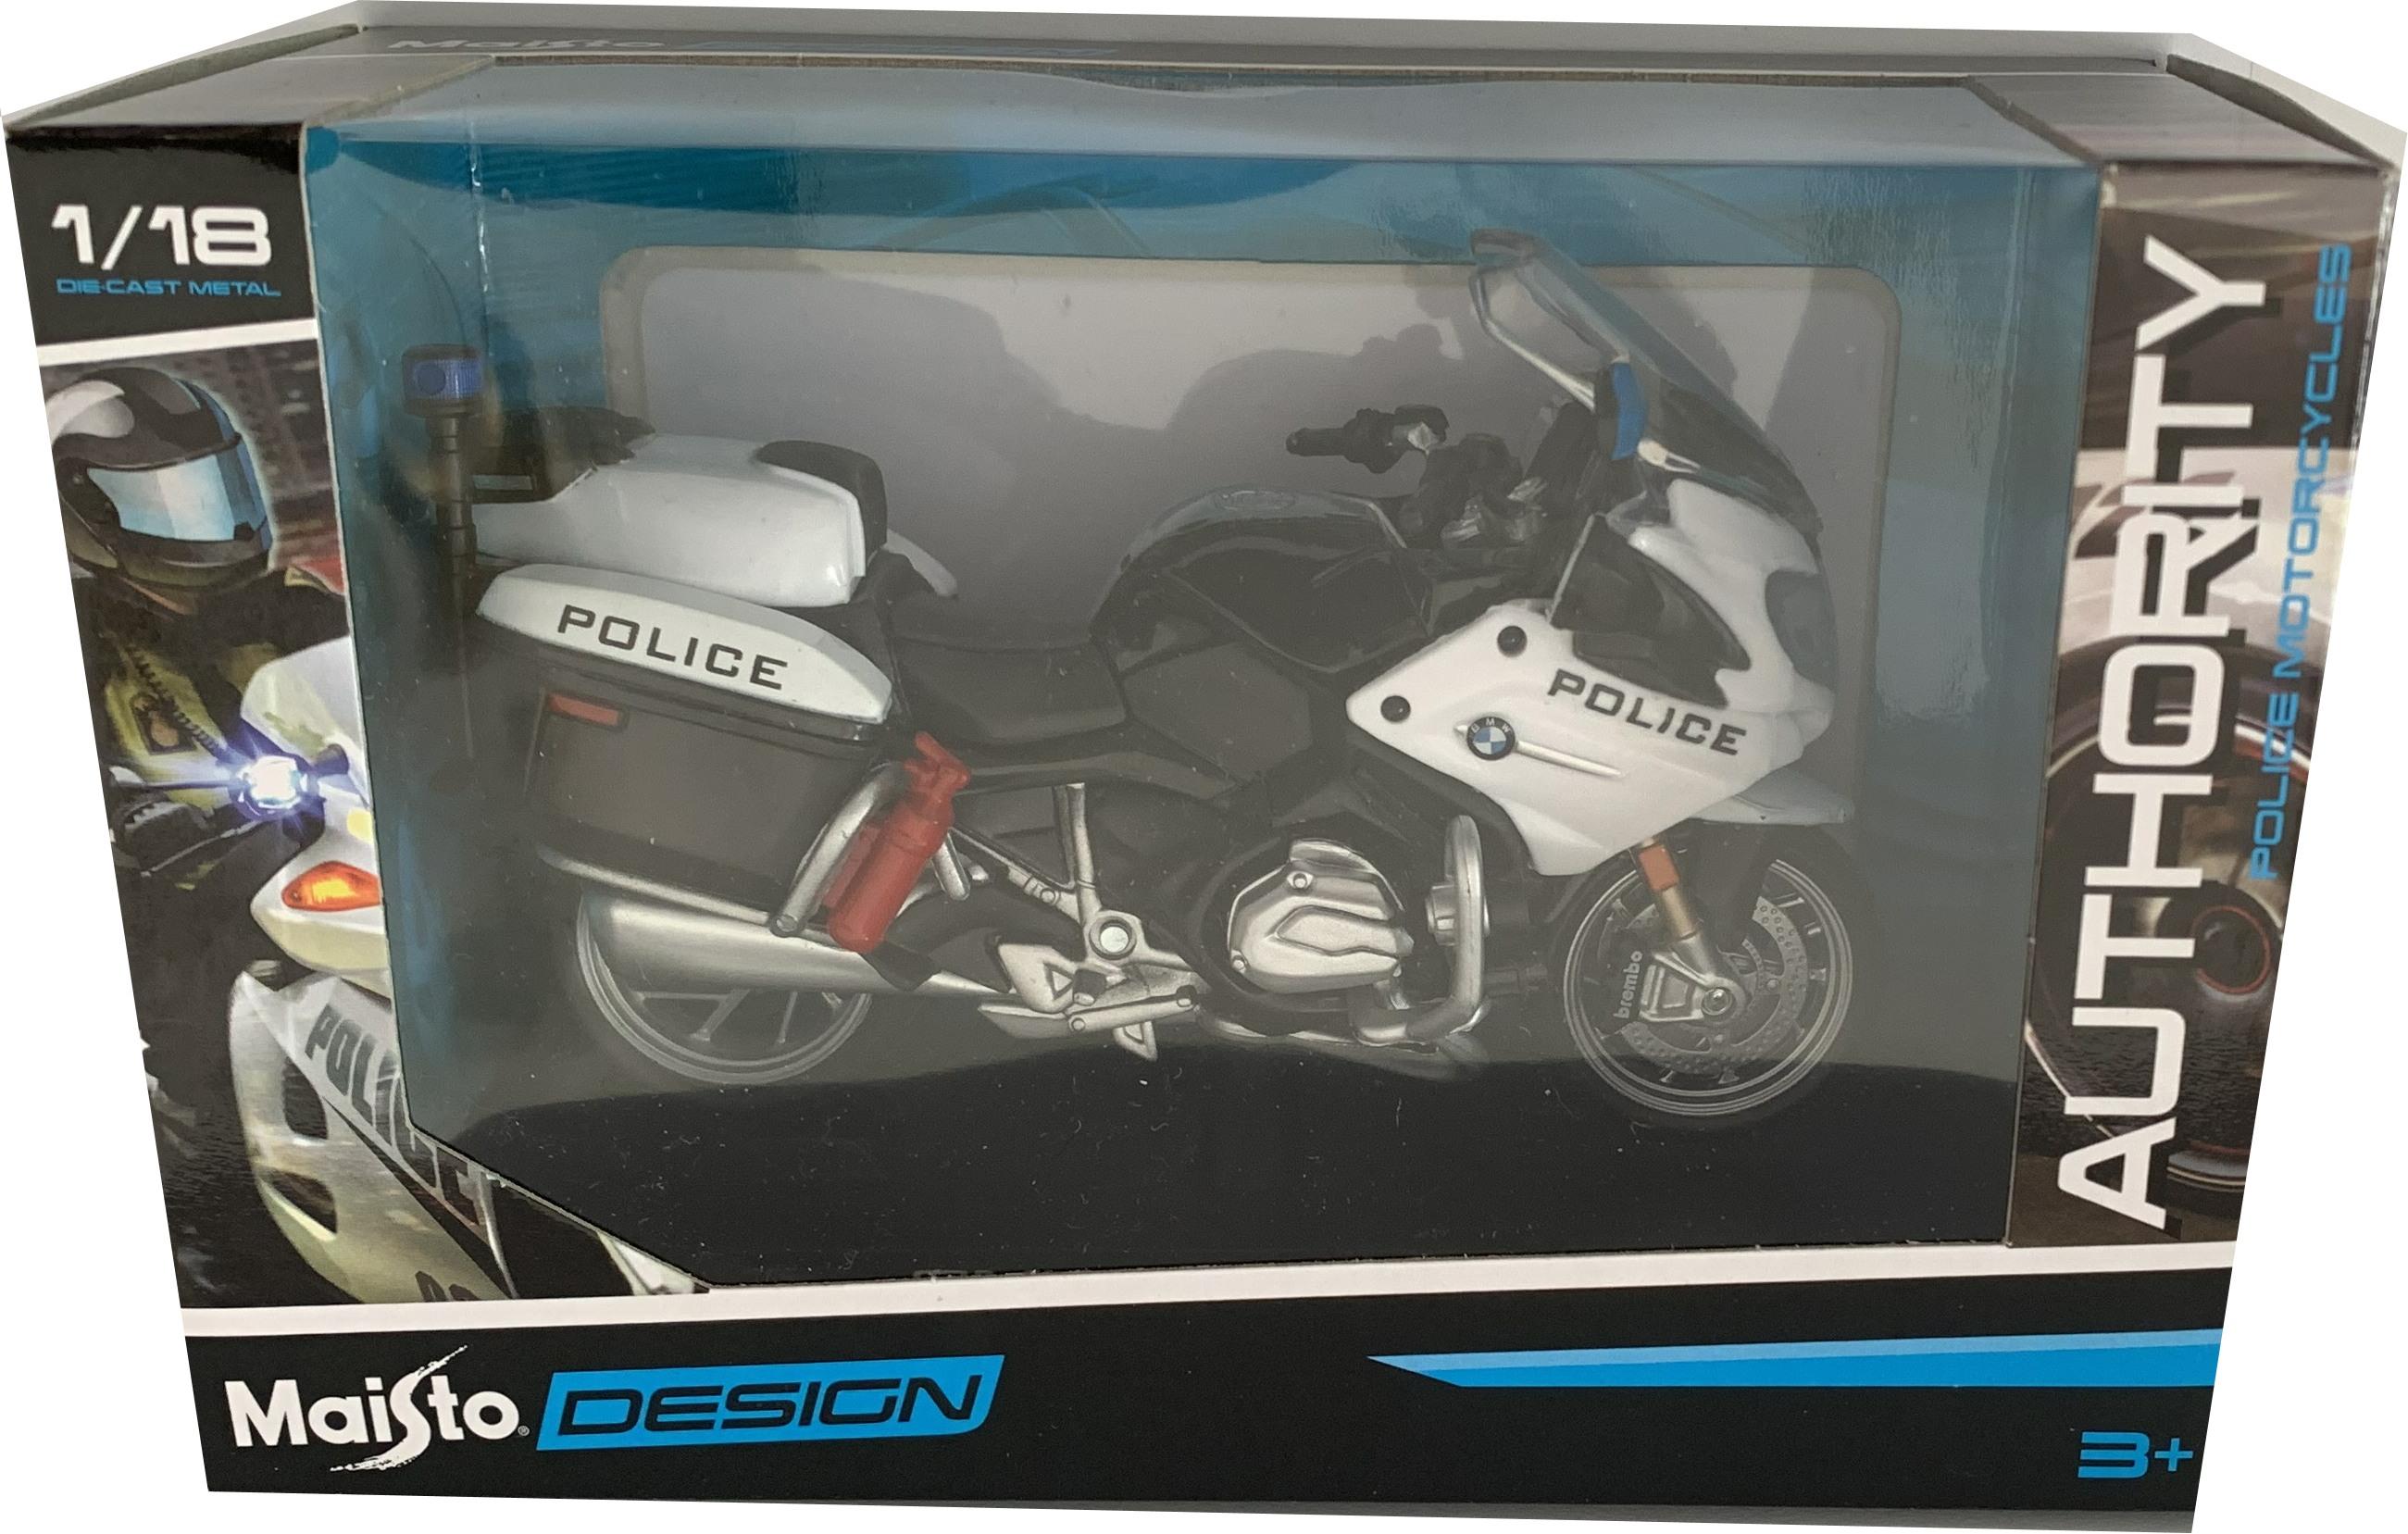 BMW R 1200 RT USA Police Authority 1:18 scale model from Maisto